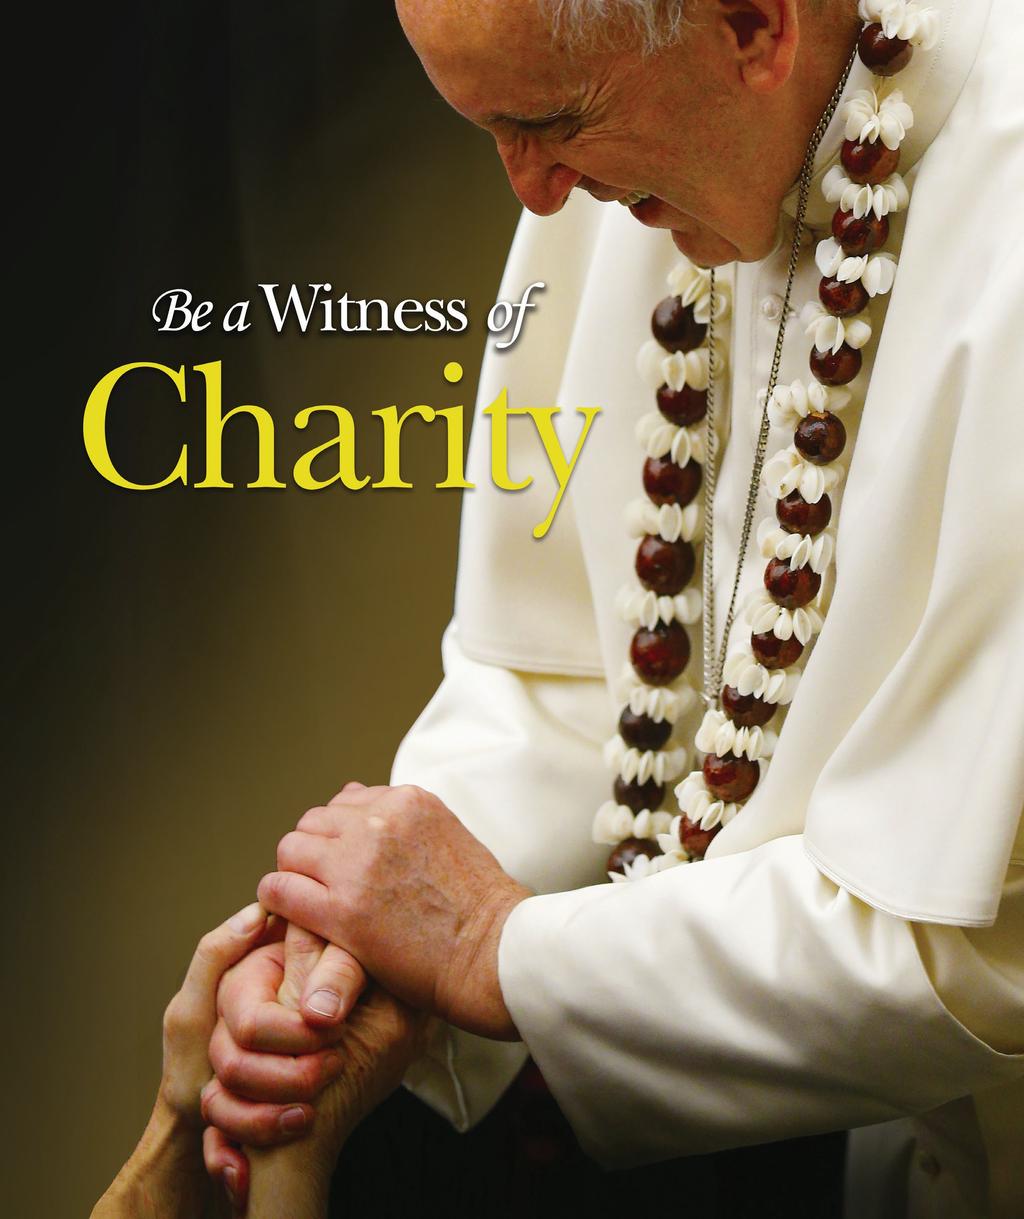 Donations to this collection support the charitable works of Pope Francis for the relief of those most in need.